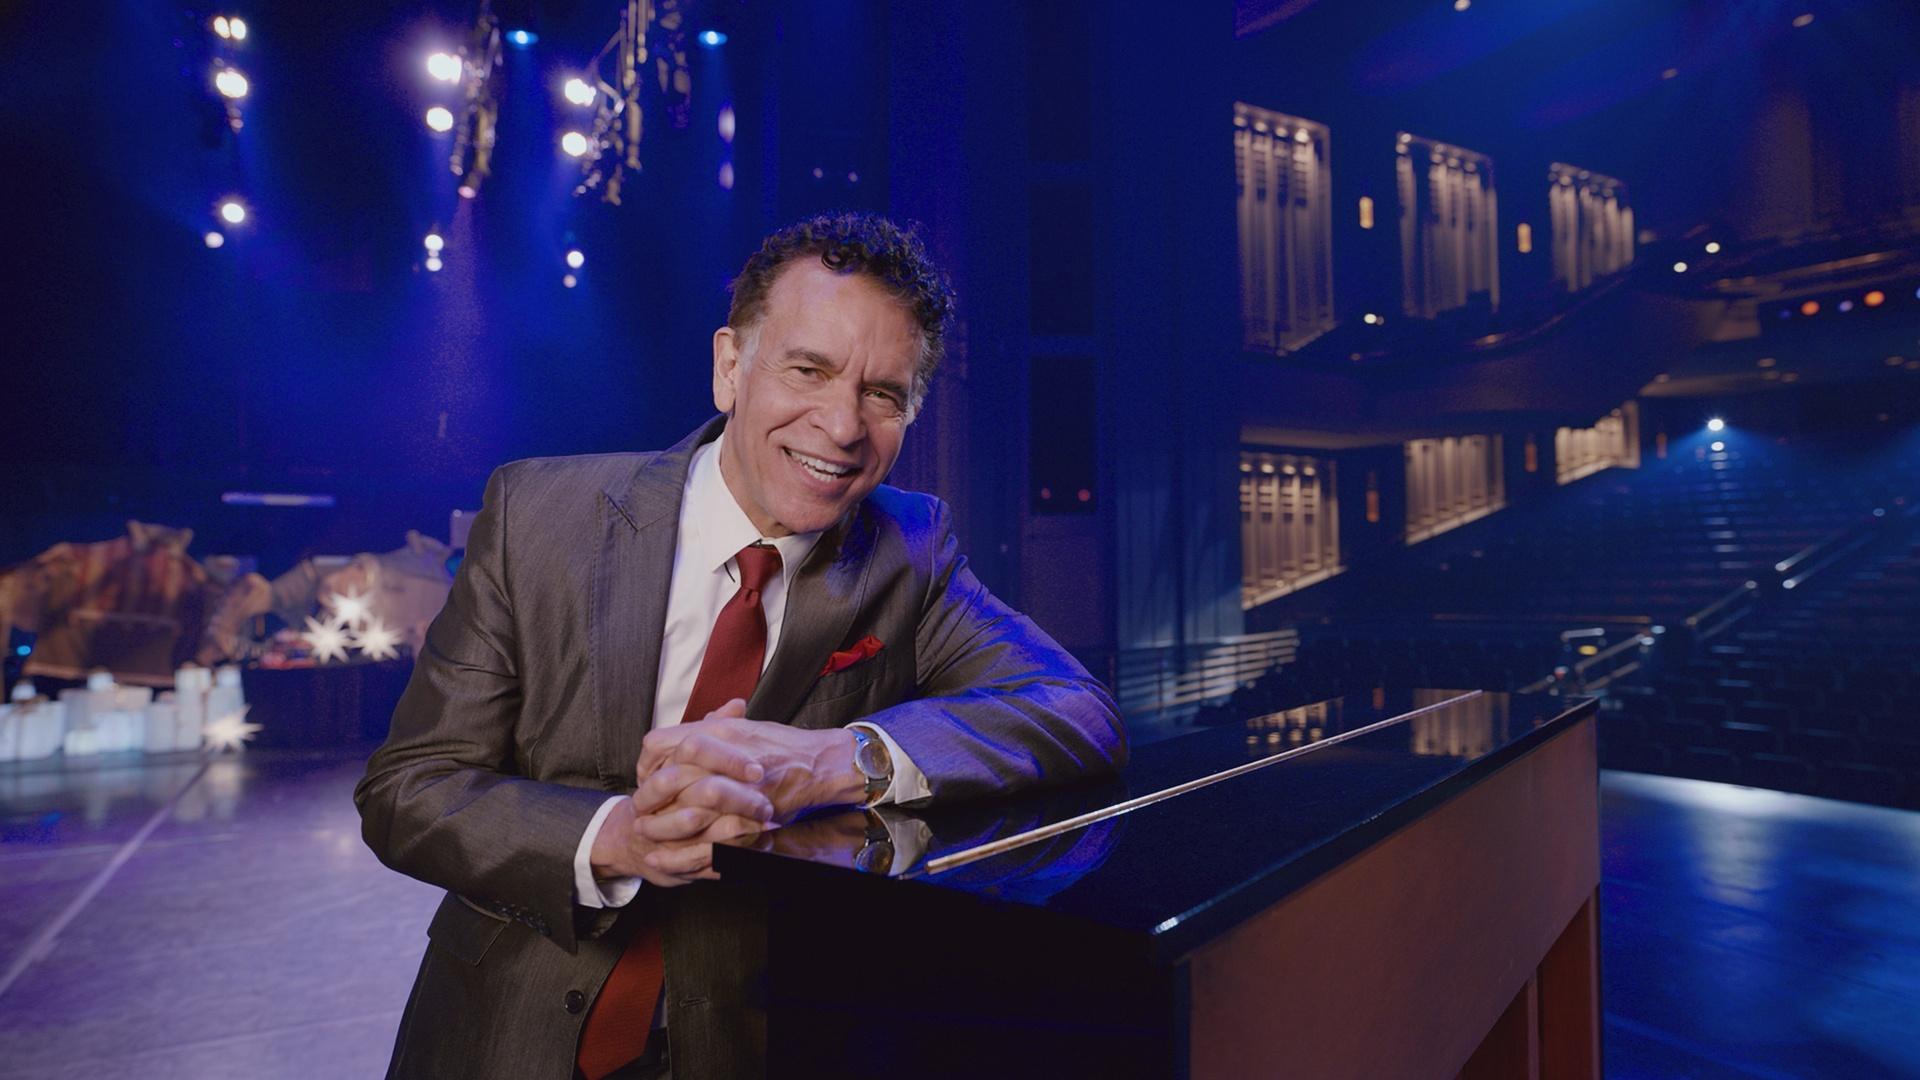 Brian Stokes Mitchell leans on a piano